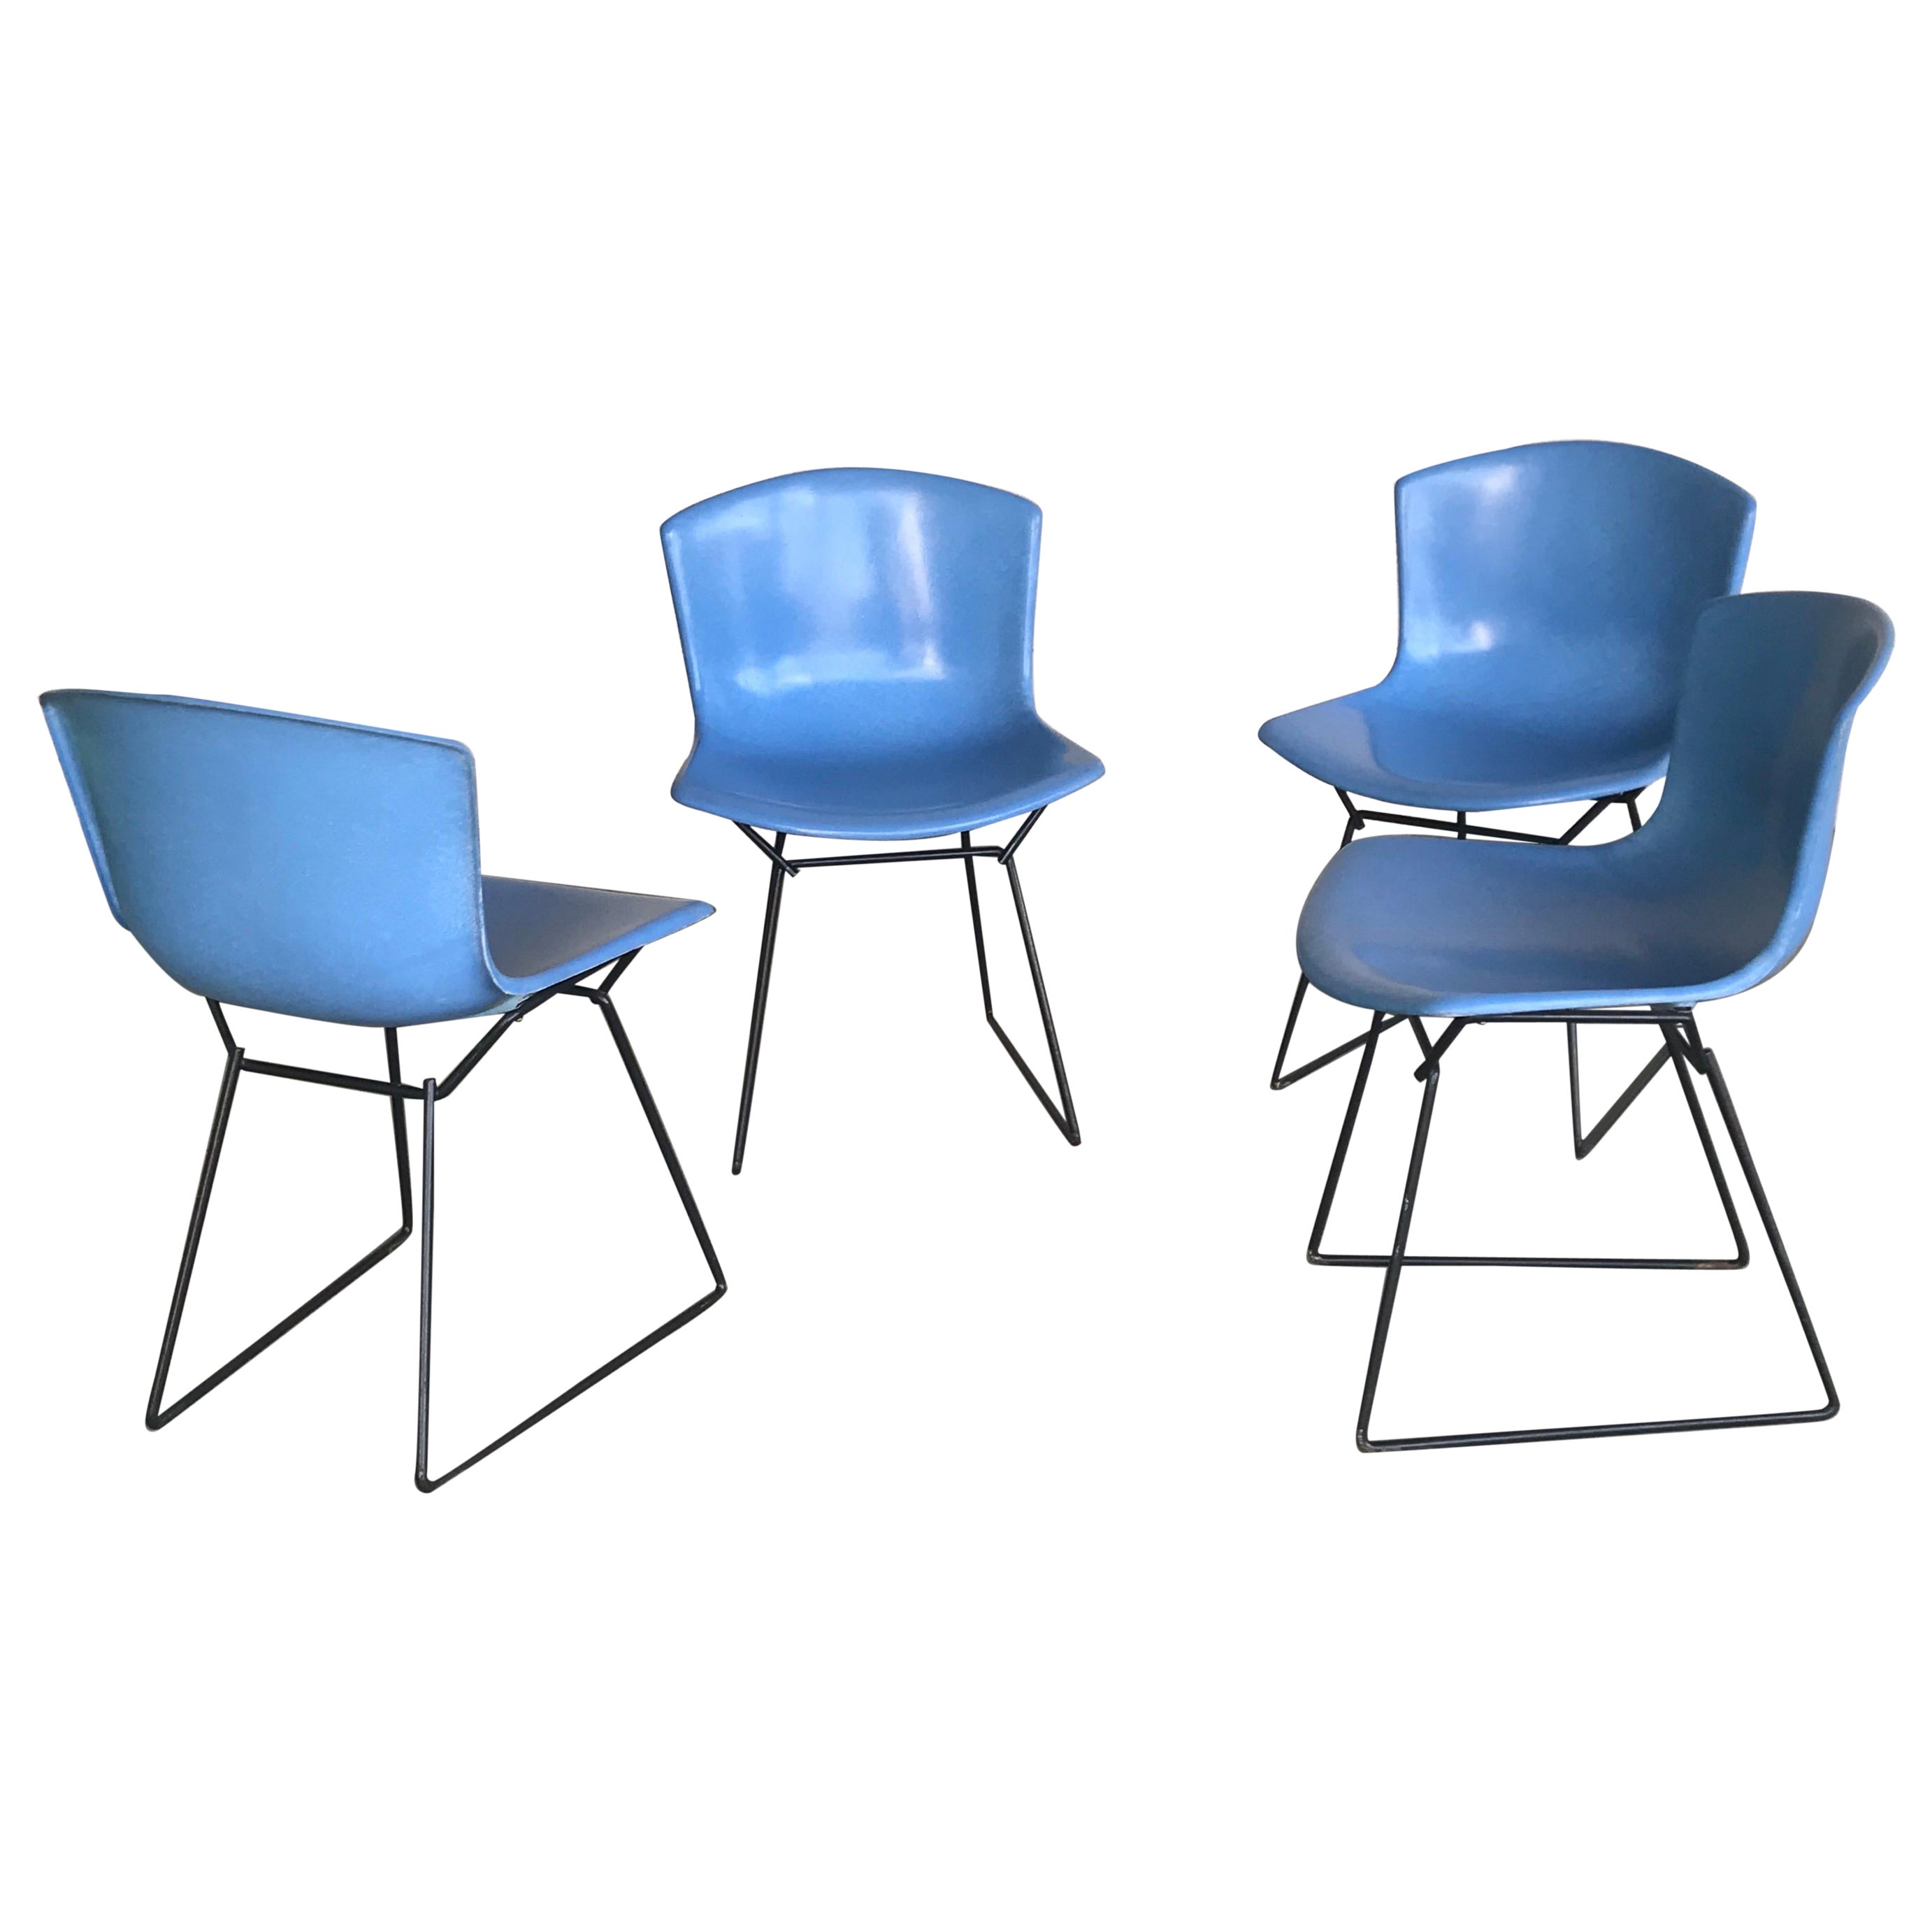 Harry Bertoia Set of Four Knoll Chairs, 1960's